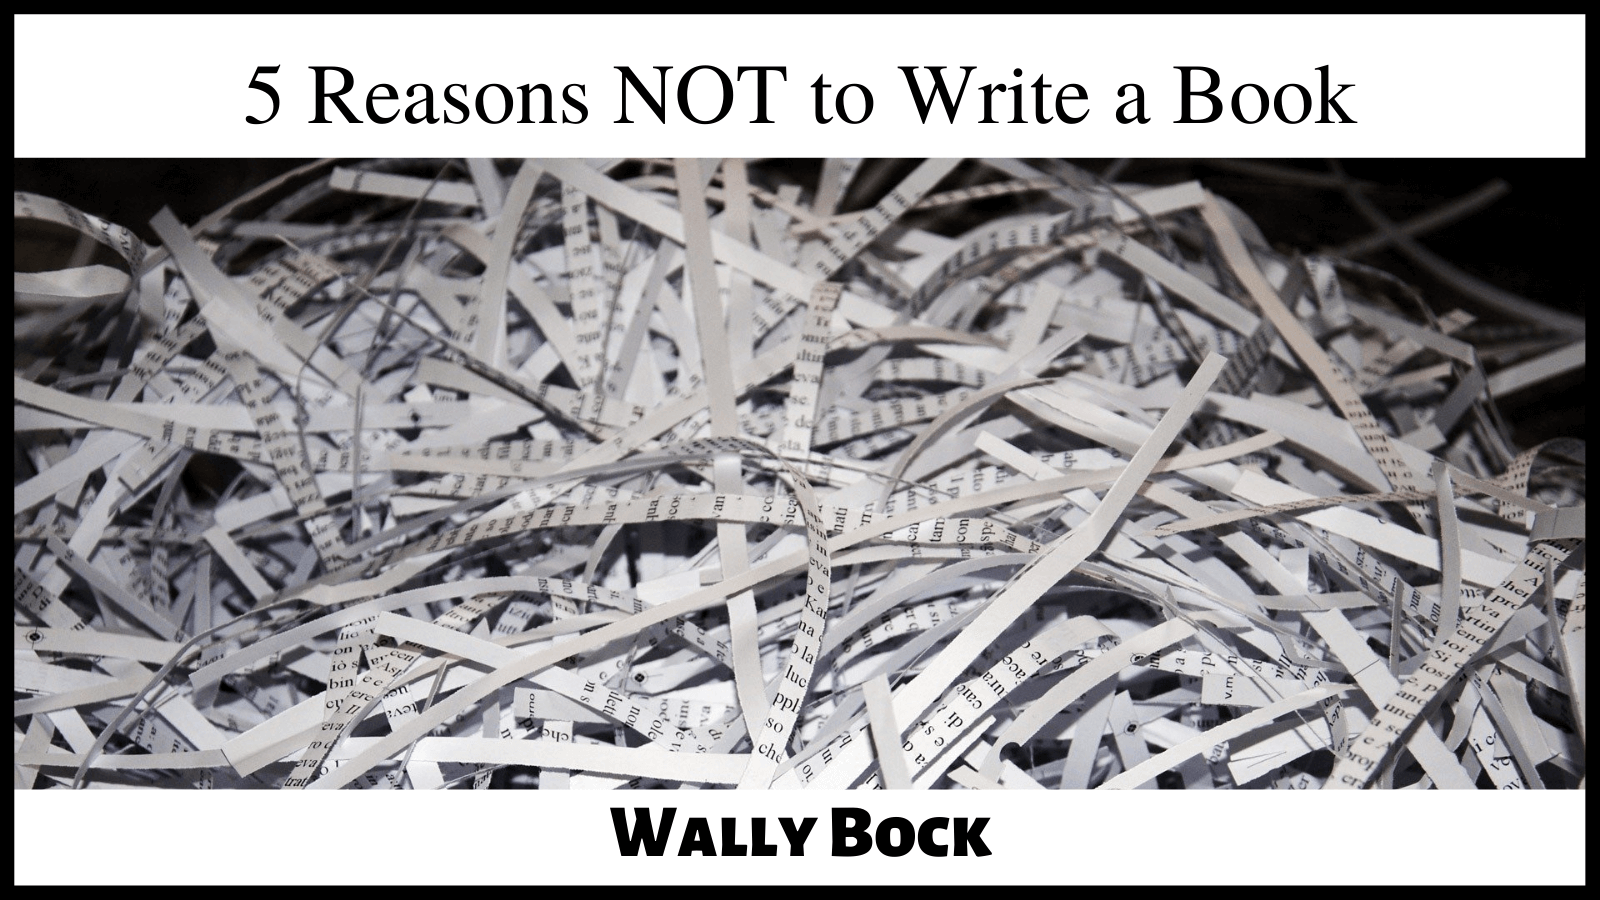 5 Reasons NOT to Write a Book